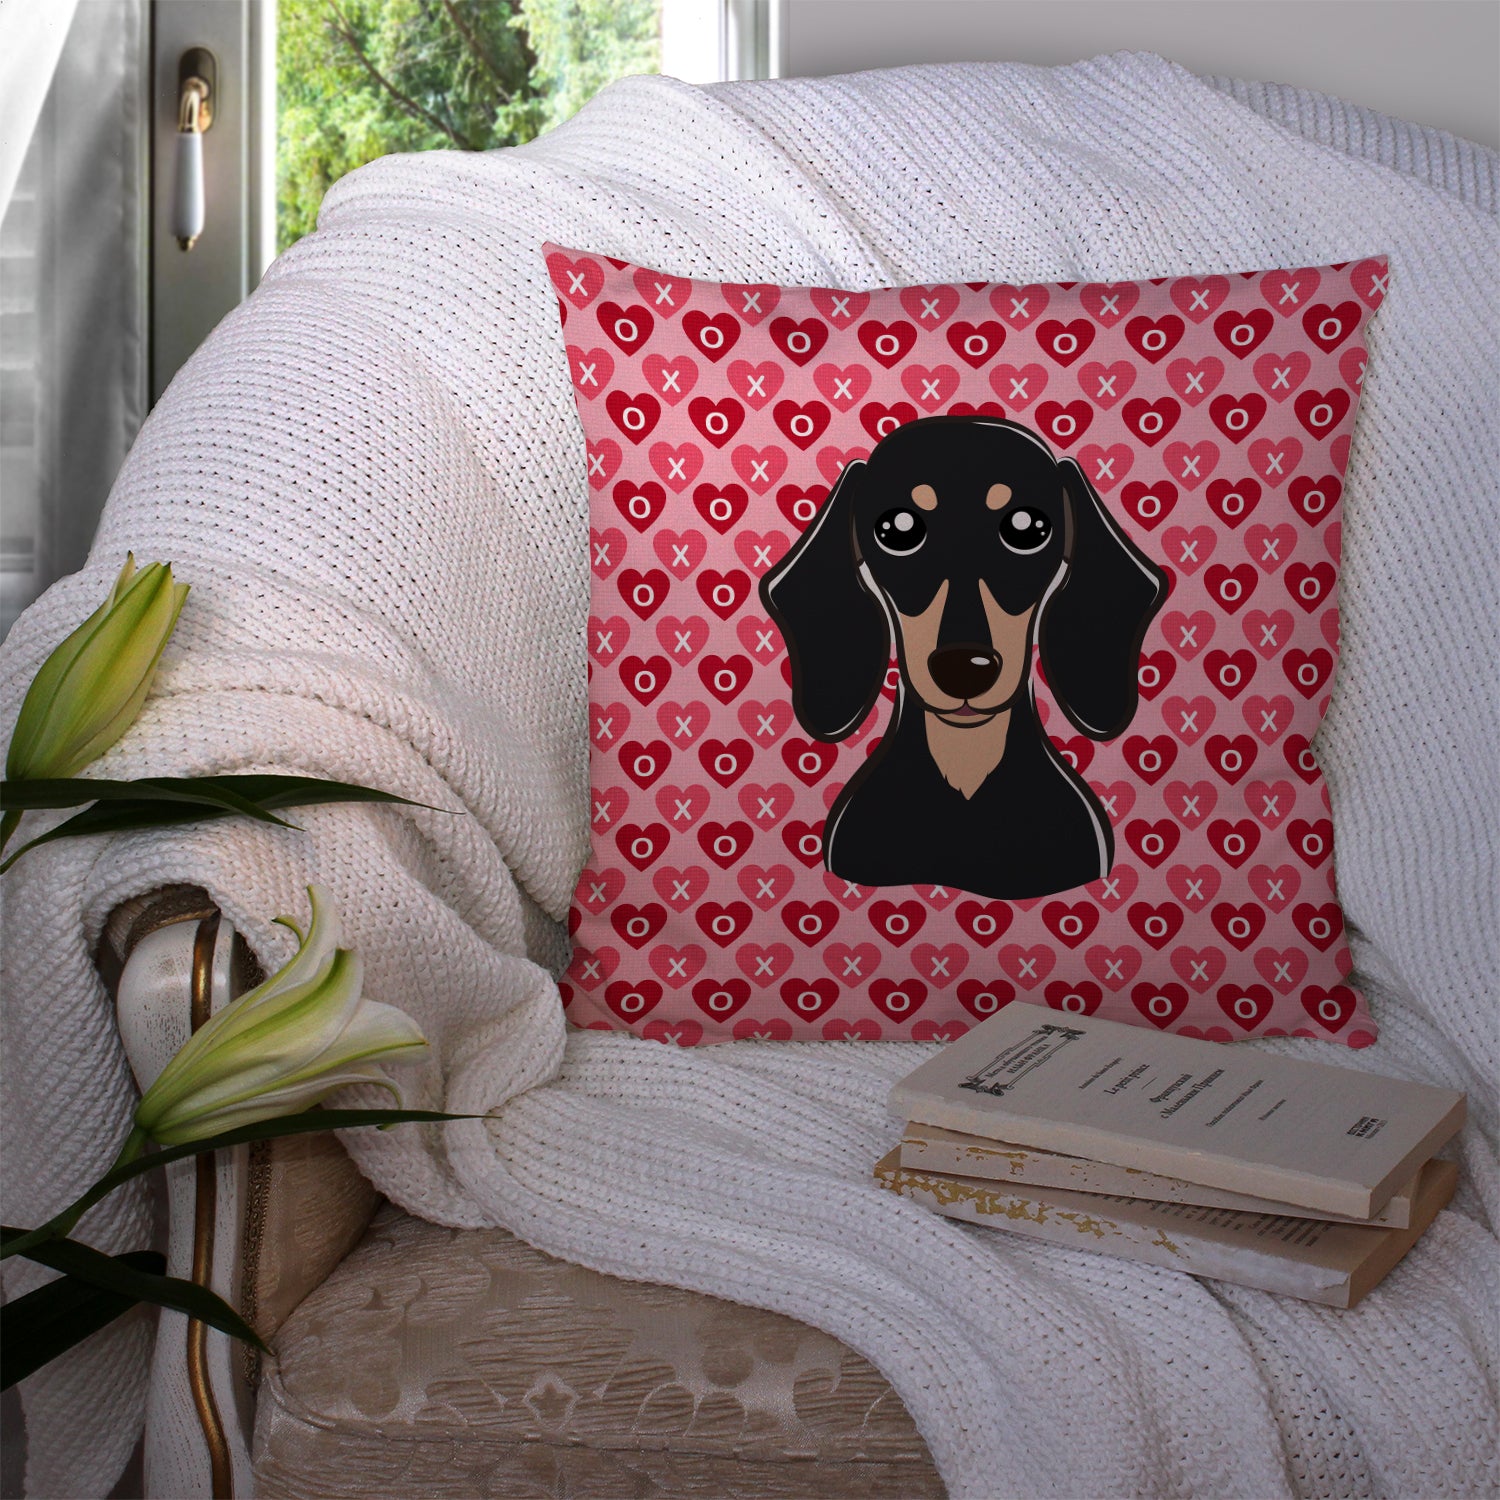 Smooth Black and Tan Dachshund Hearts Fabric Decorative Pillow BB5285PW1414 - the-store.com